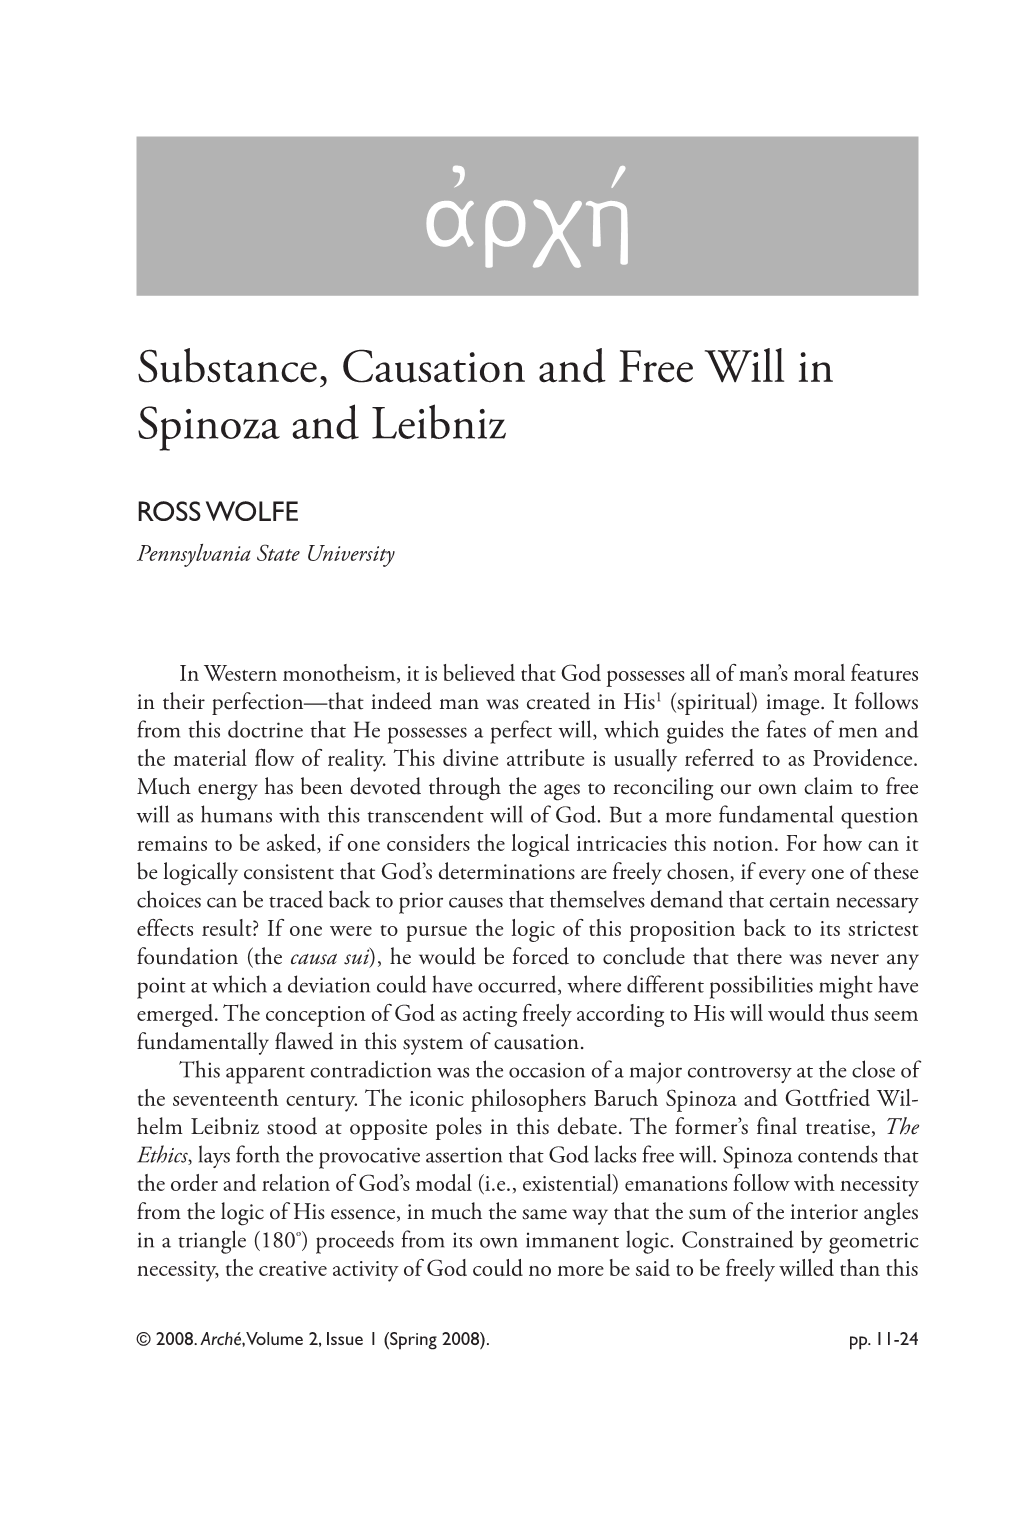 Substance, Causation and Free Will in Spinoza and Leibniz